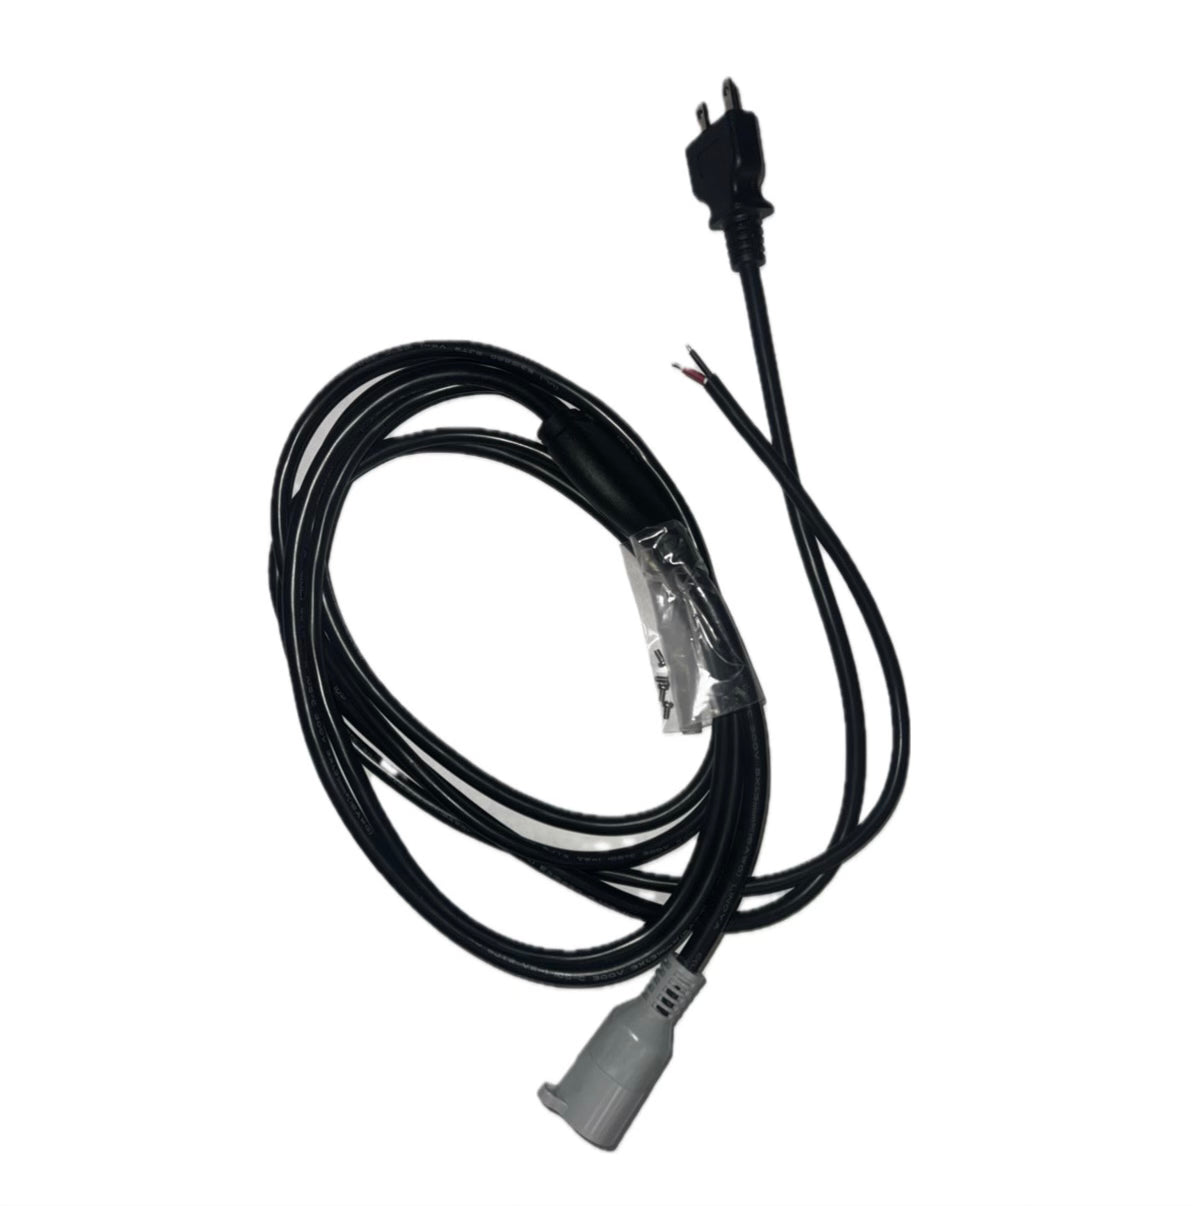 Dimmable Power Cord For Undercanopy Lights - 10v